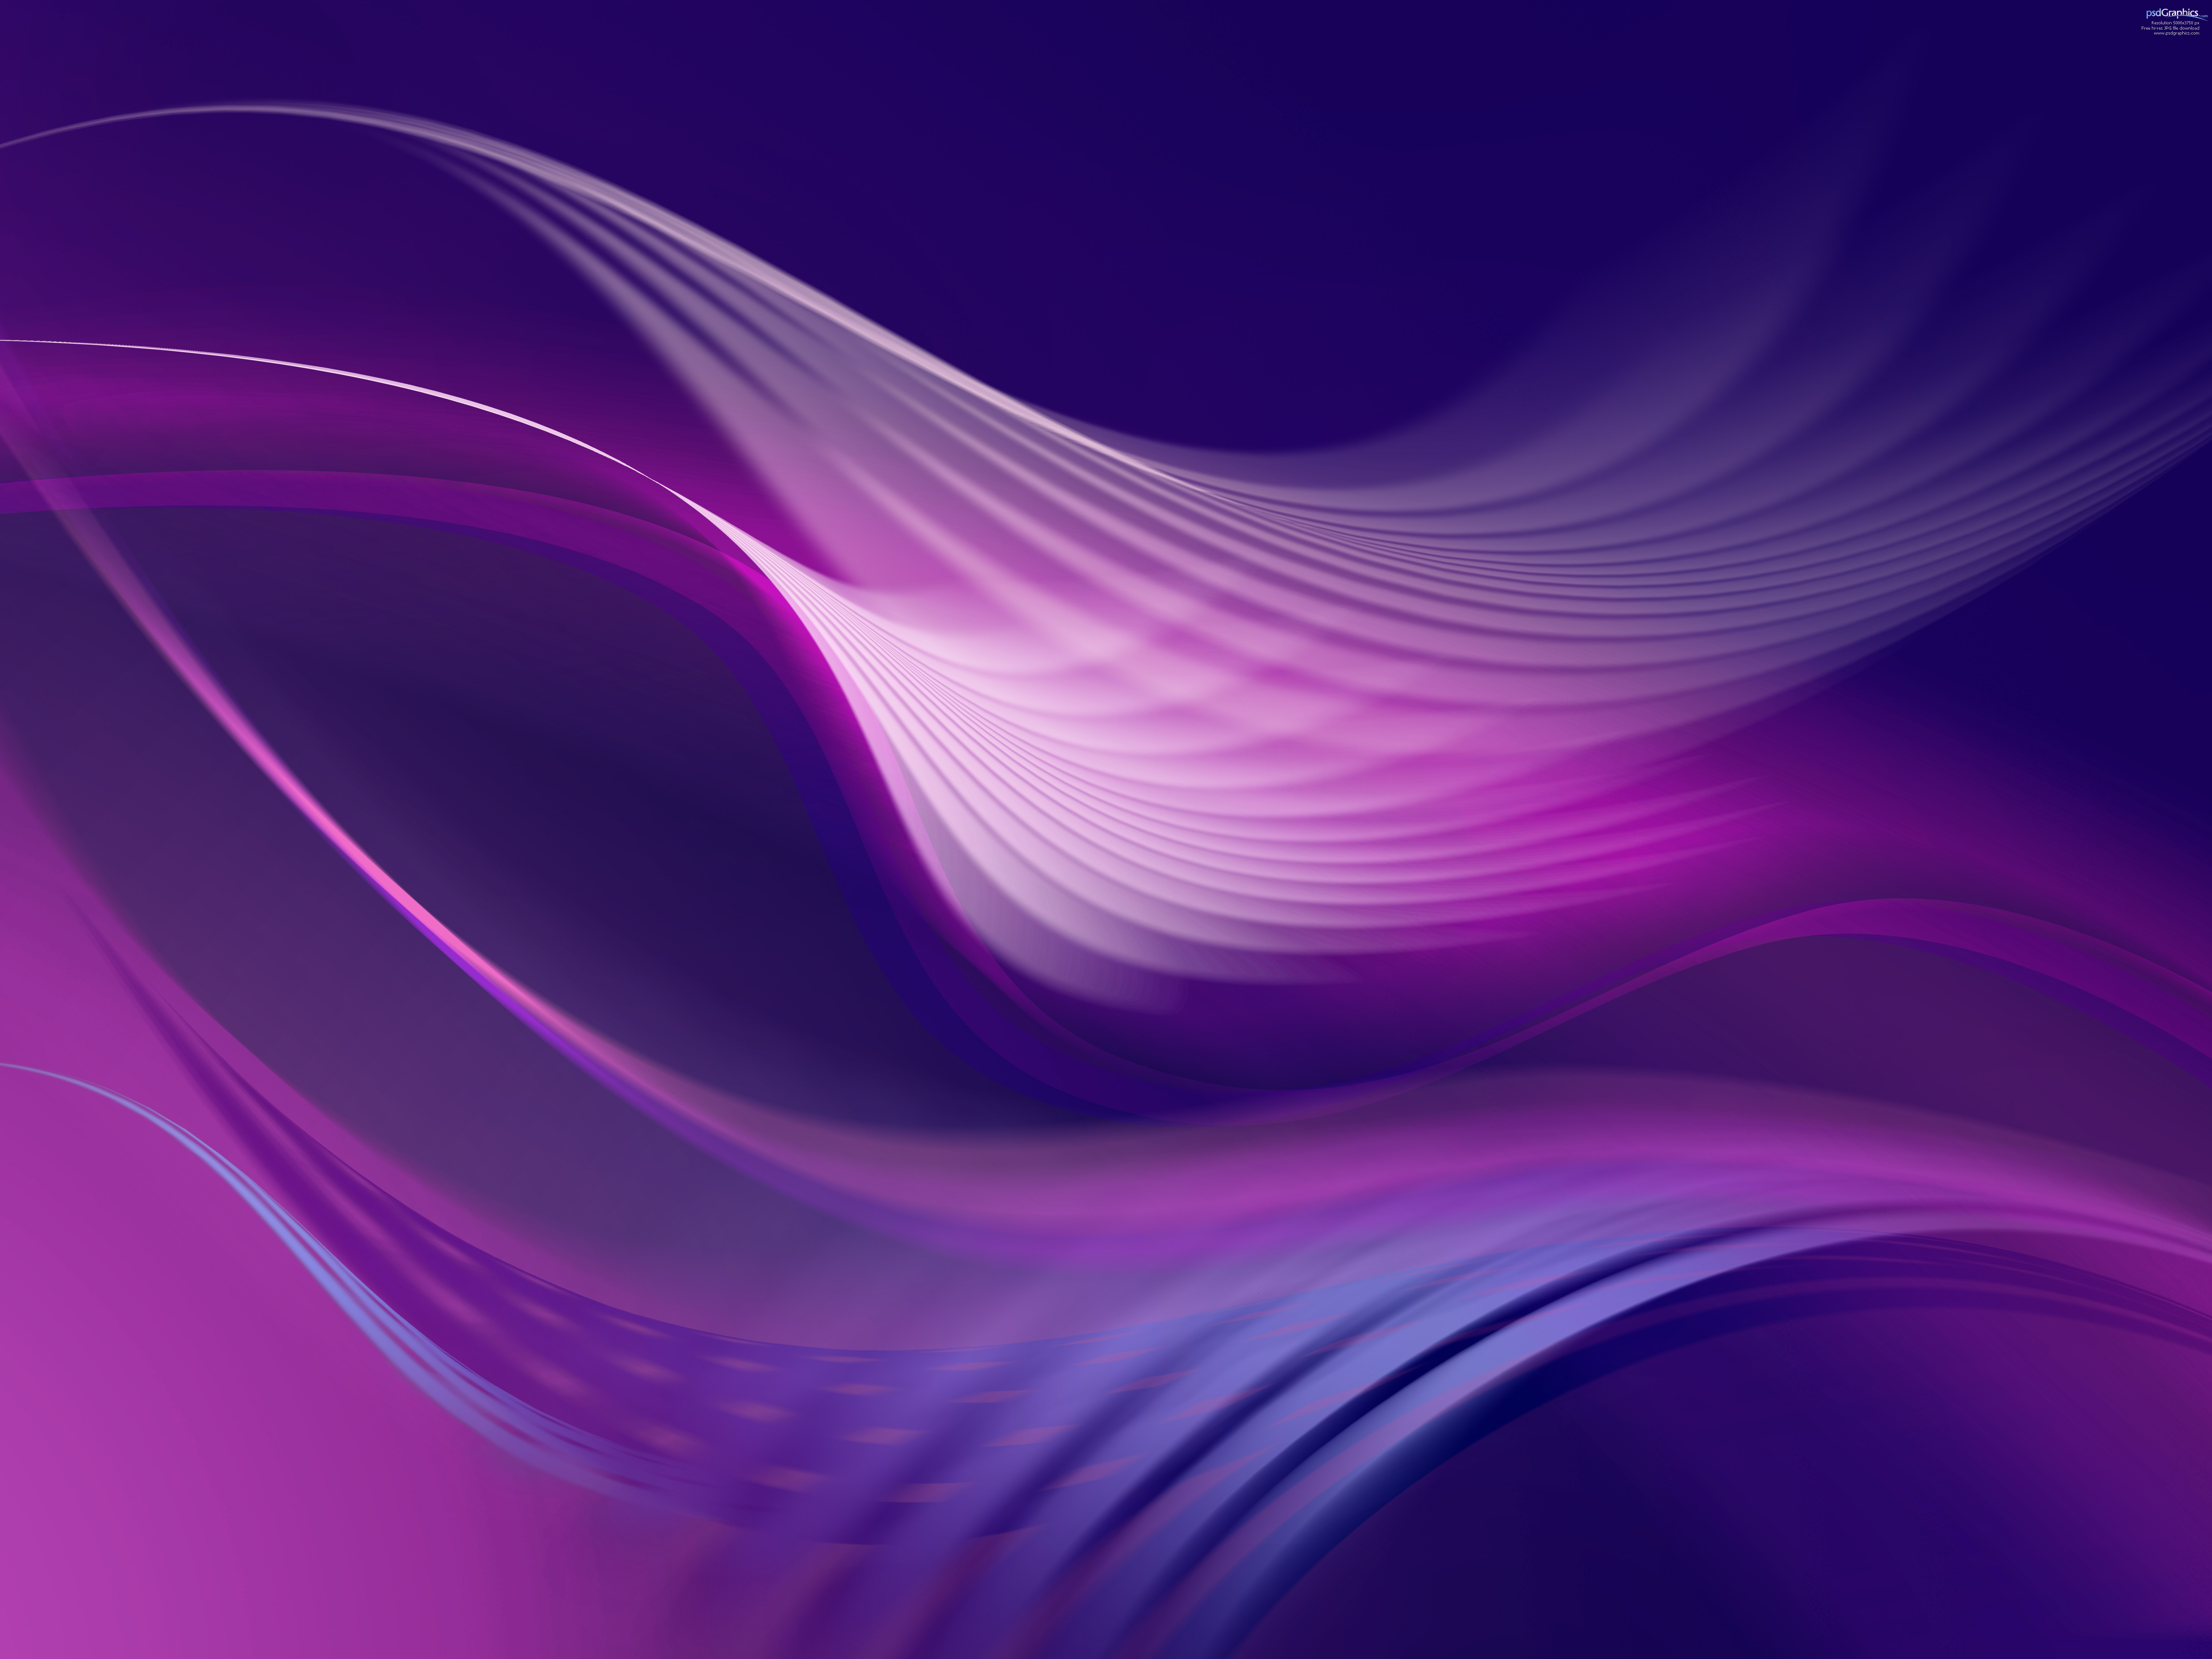 76+] Abstract Background Images - WallpaperSafari